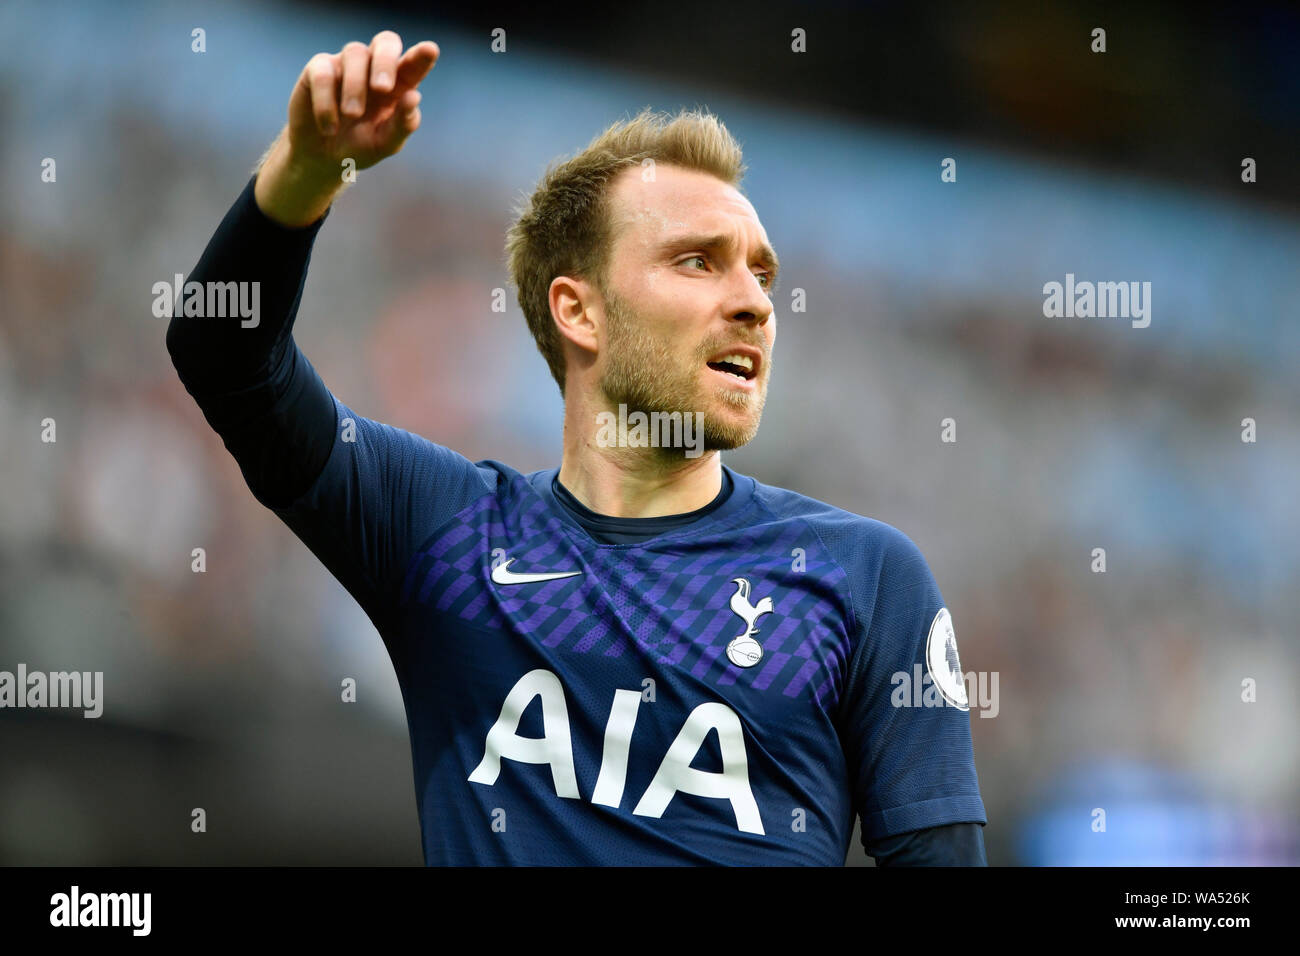 17th August 2019; Etihad Stadium, Manchester, Greater Manchester, England; Manchester City versus Tottenham Hotspur; Christian Eriksen of Tottenham Hotspur points to where he wants the ball to be played - Strictly Editorial Use Only. No use with unauthorized audio, video, data, fixture lists, club/league logos or 'live' services. Online in-match use limited to 120 images, no video emulation. Stock Photo